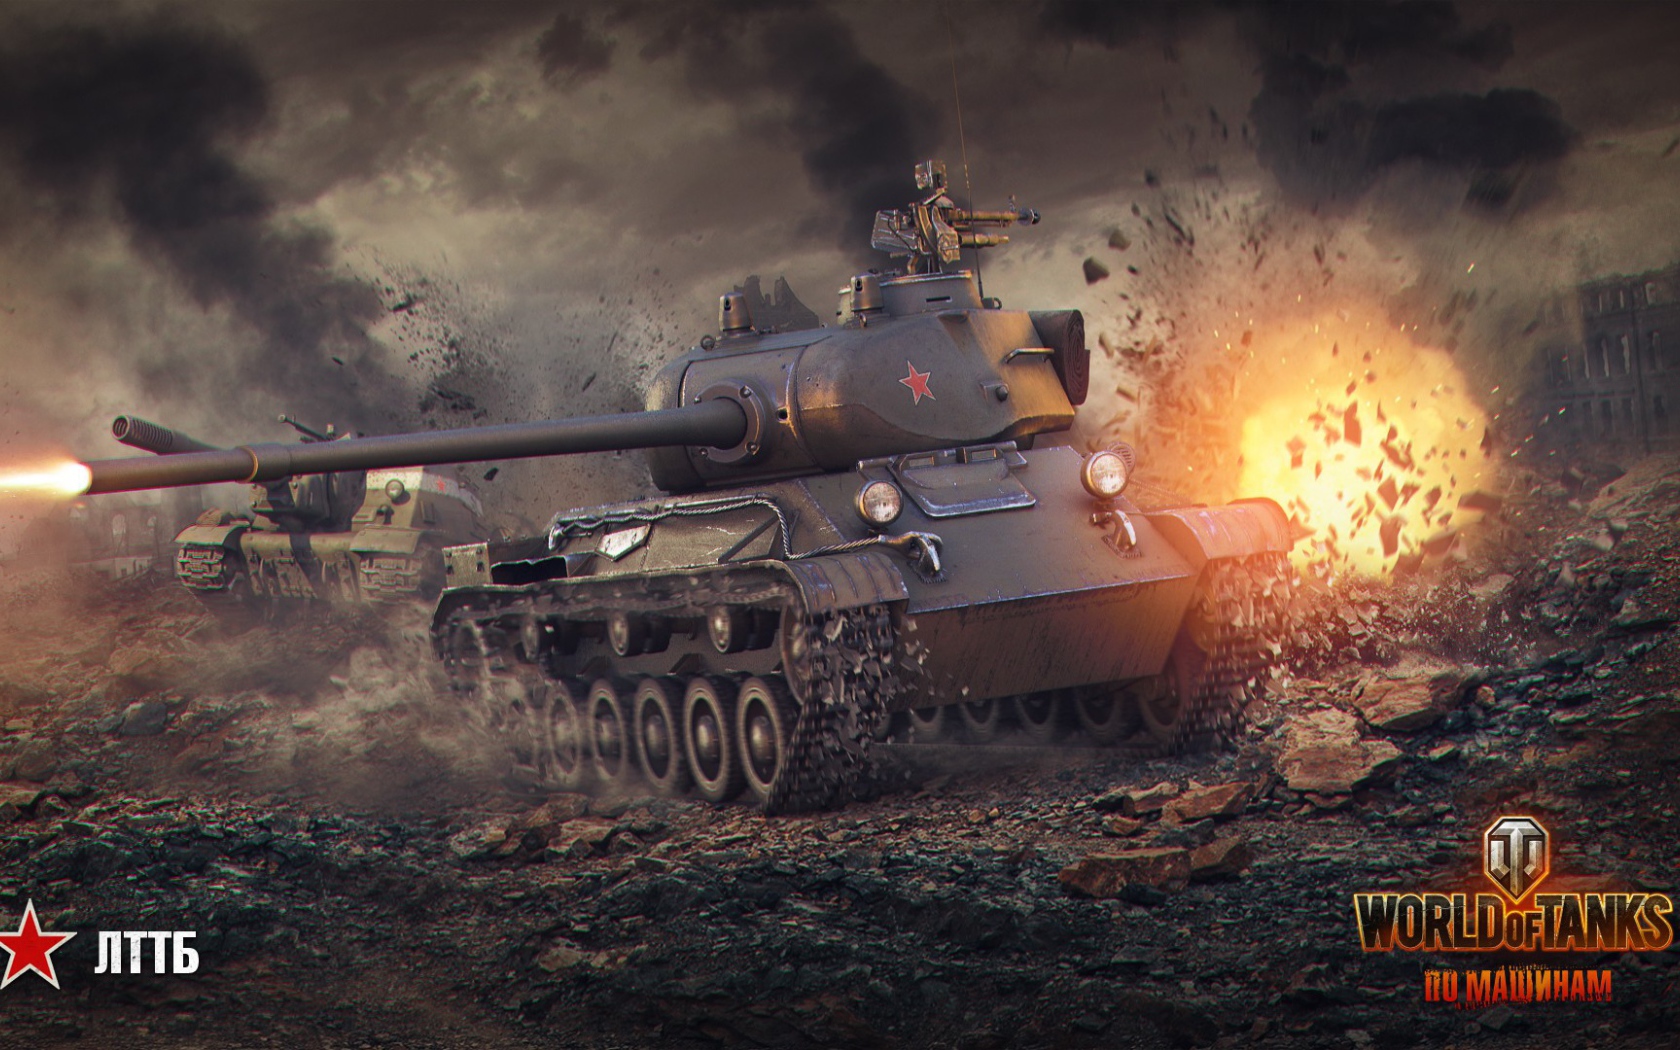 The explosion of the tank in the game World of Tanks